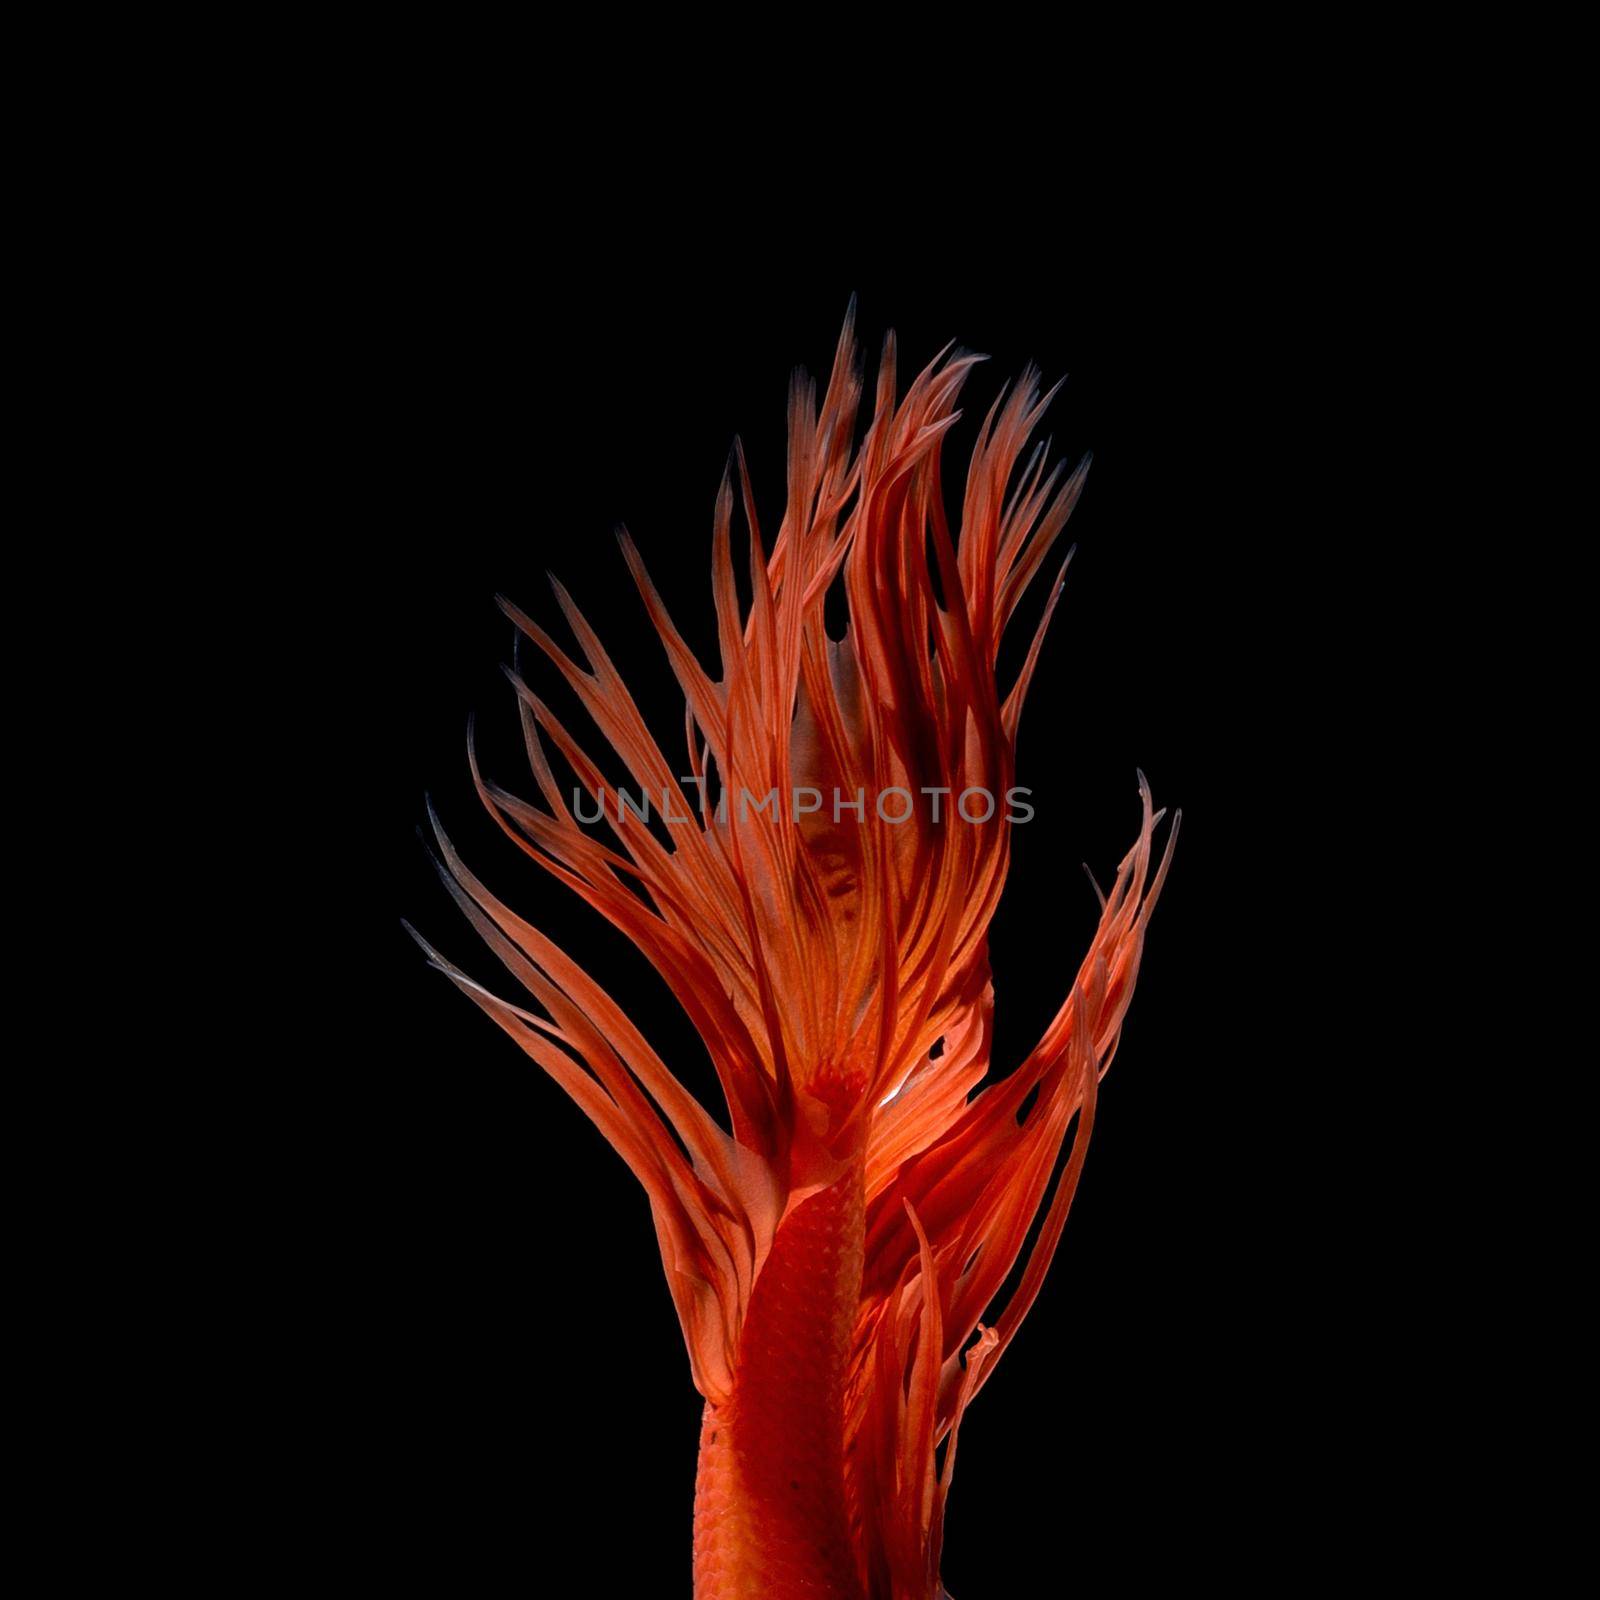 Abstract art movement of colourful Betta fish,Siamese fighting fish isolated on black background.Fine art design concept.